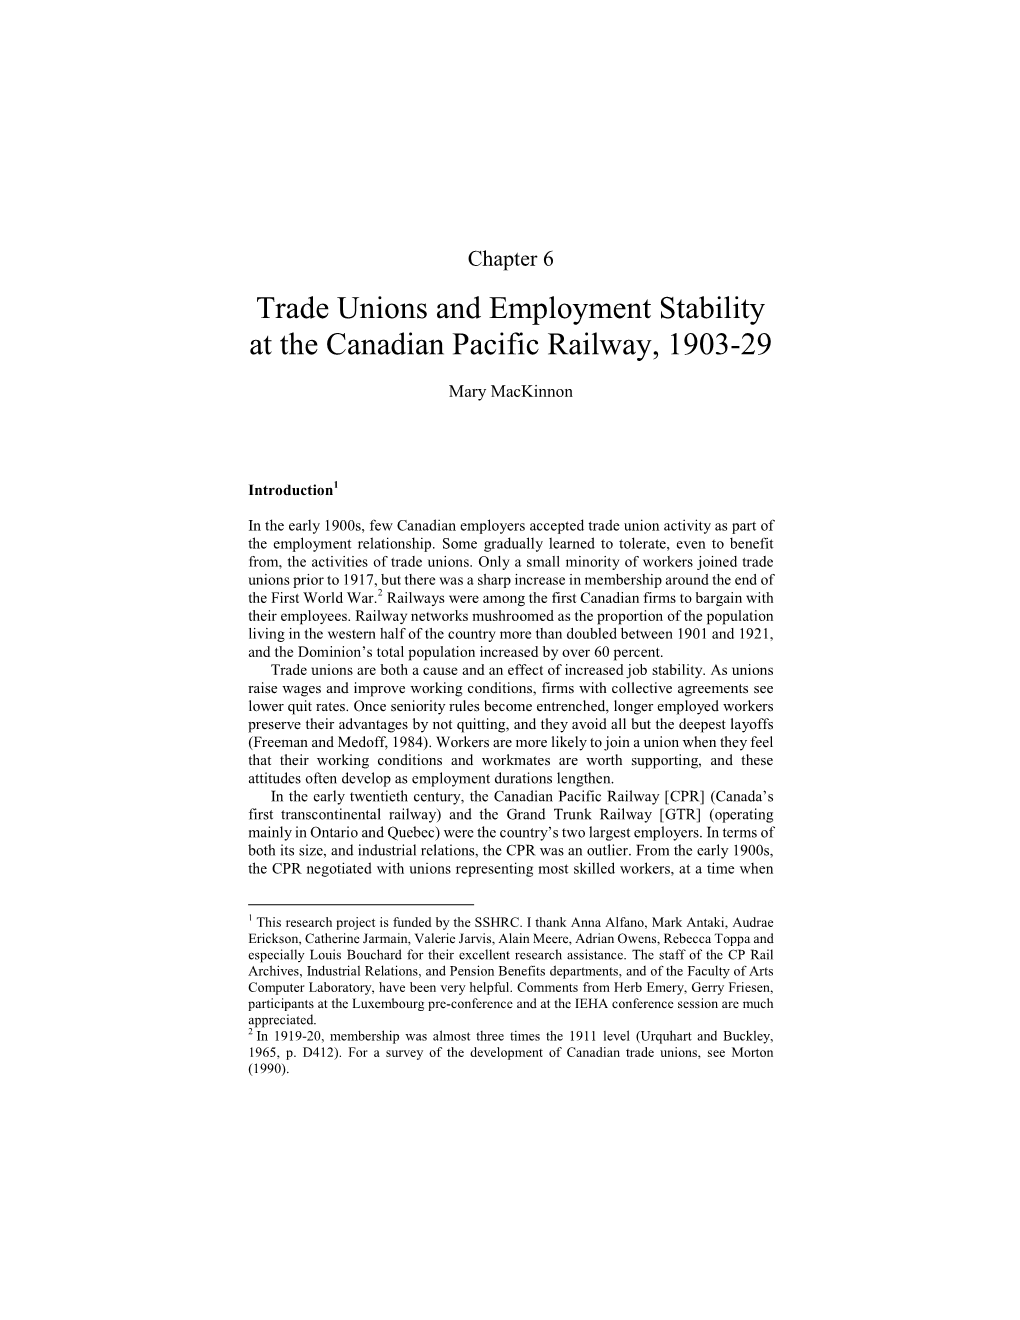 Trade Unions and Employment Stability at the Canadian Pacific Railway, 1903-29